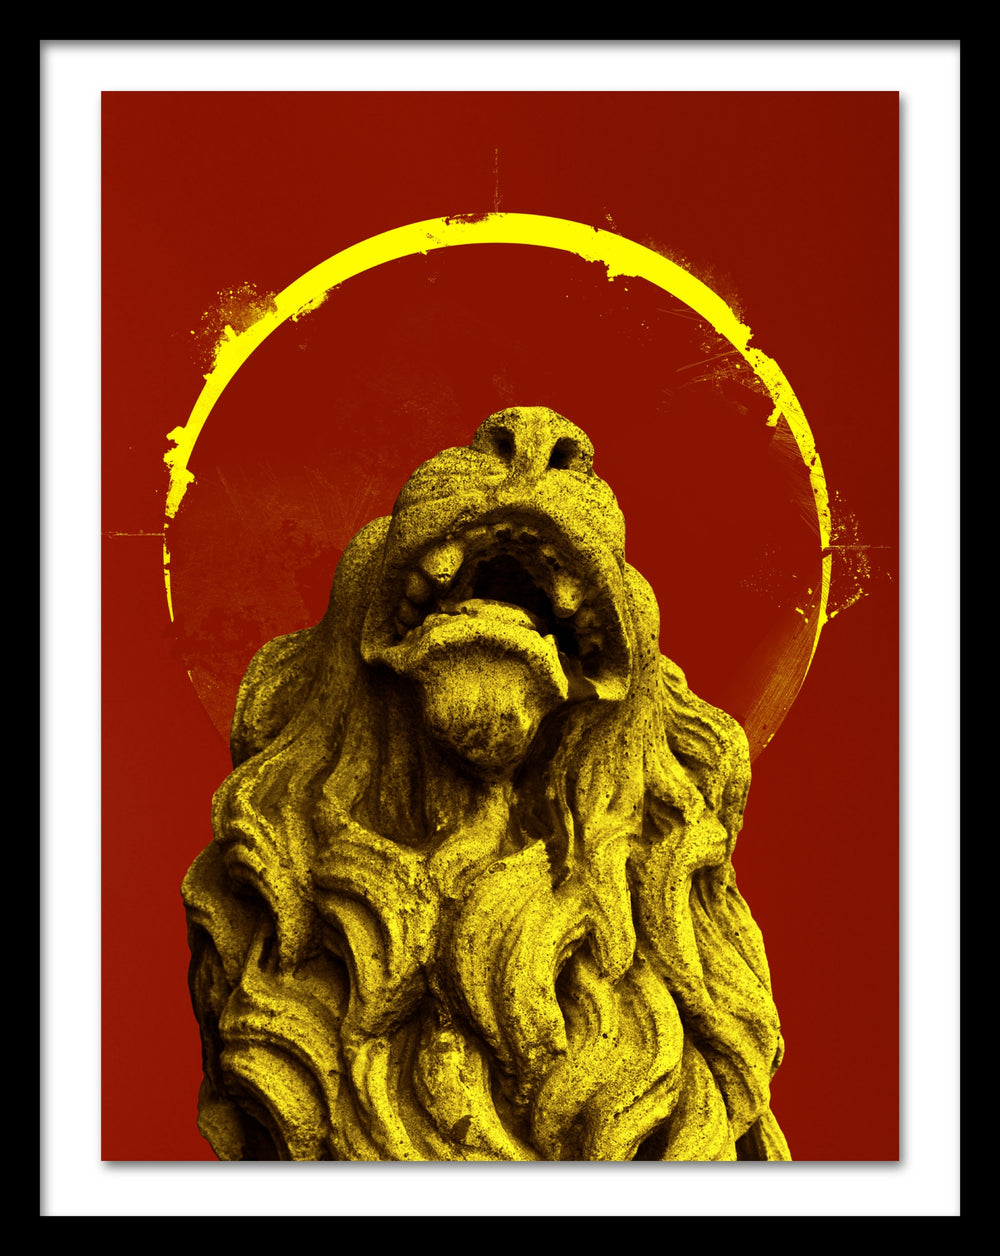 A poster that depicts a golden lion on a red background